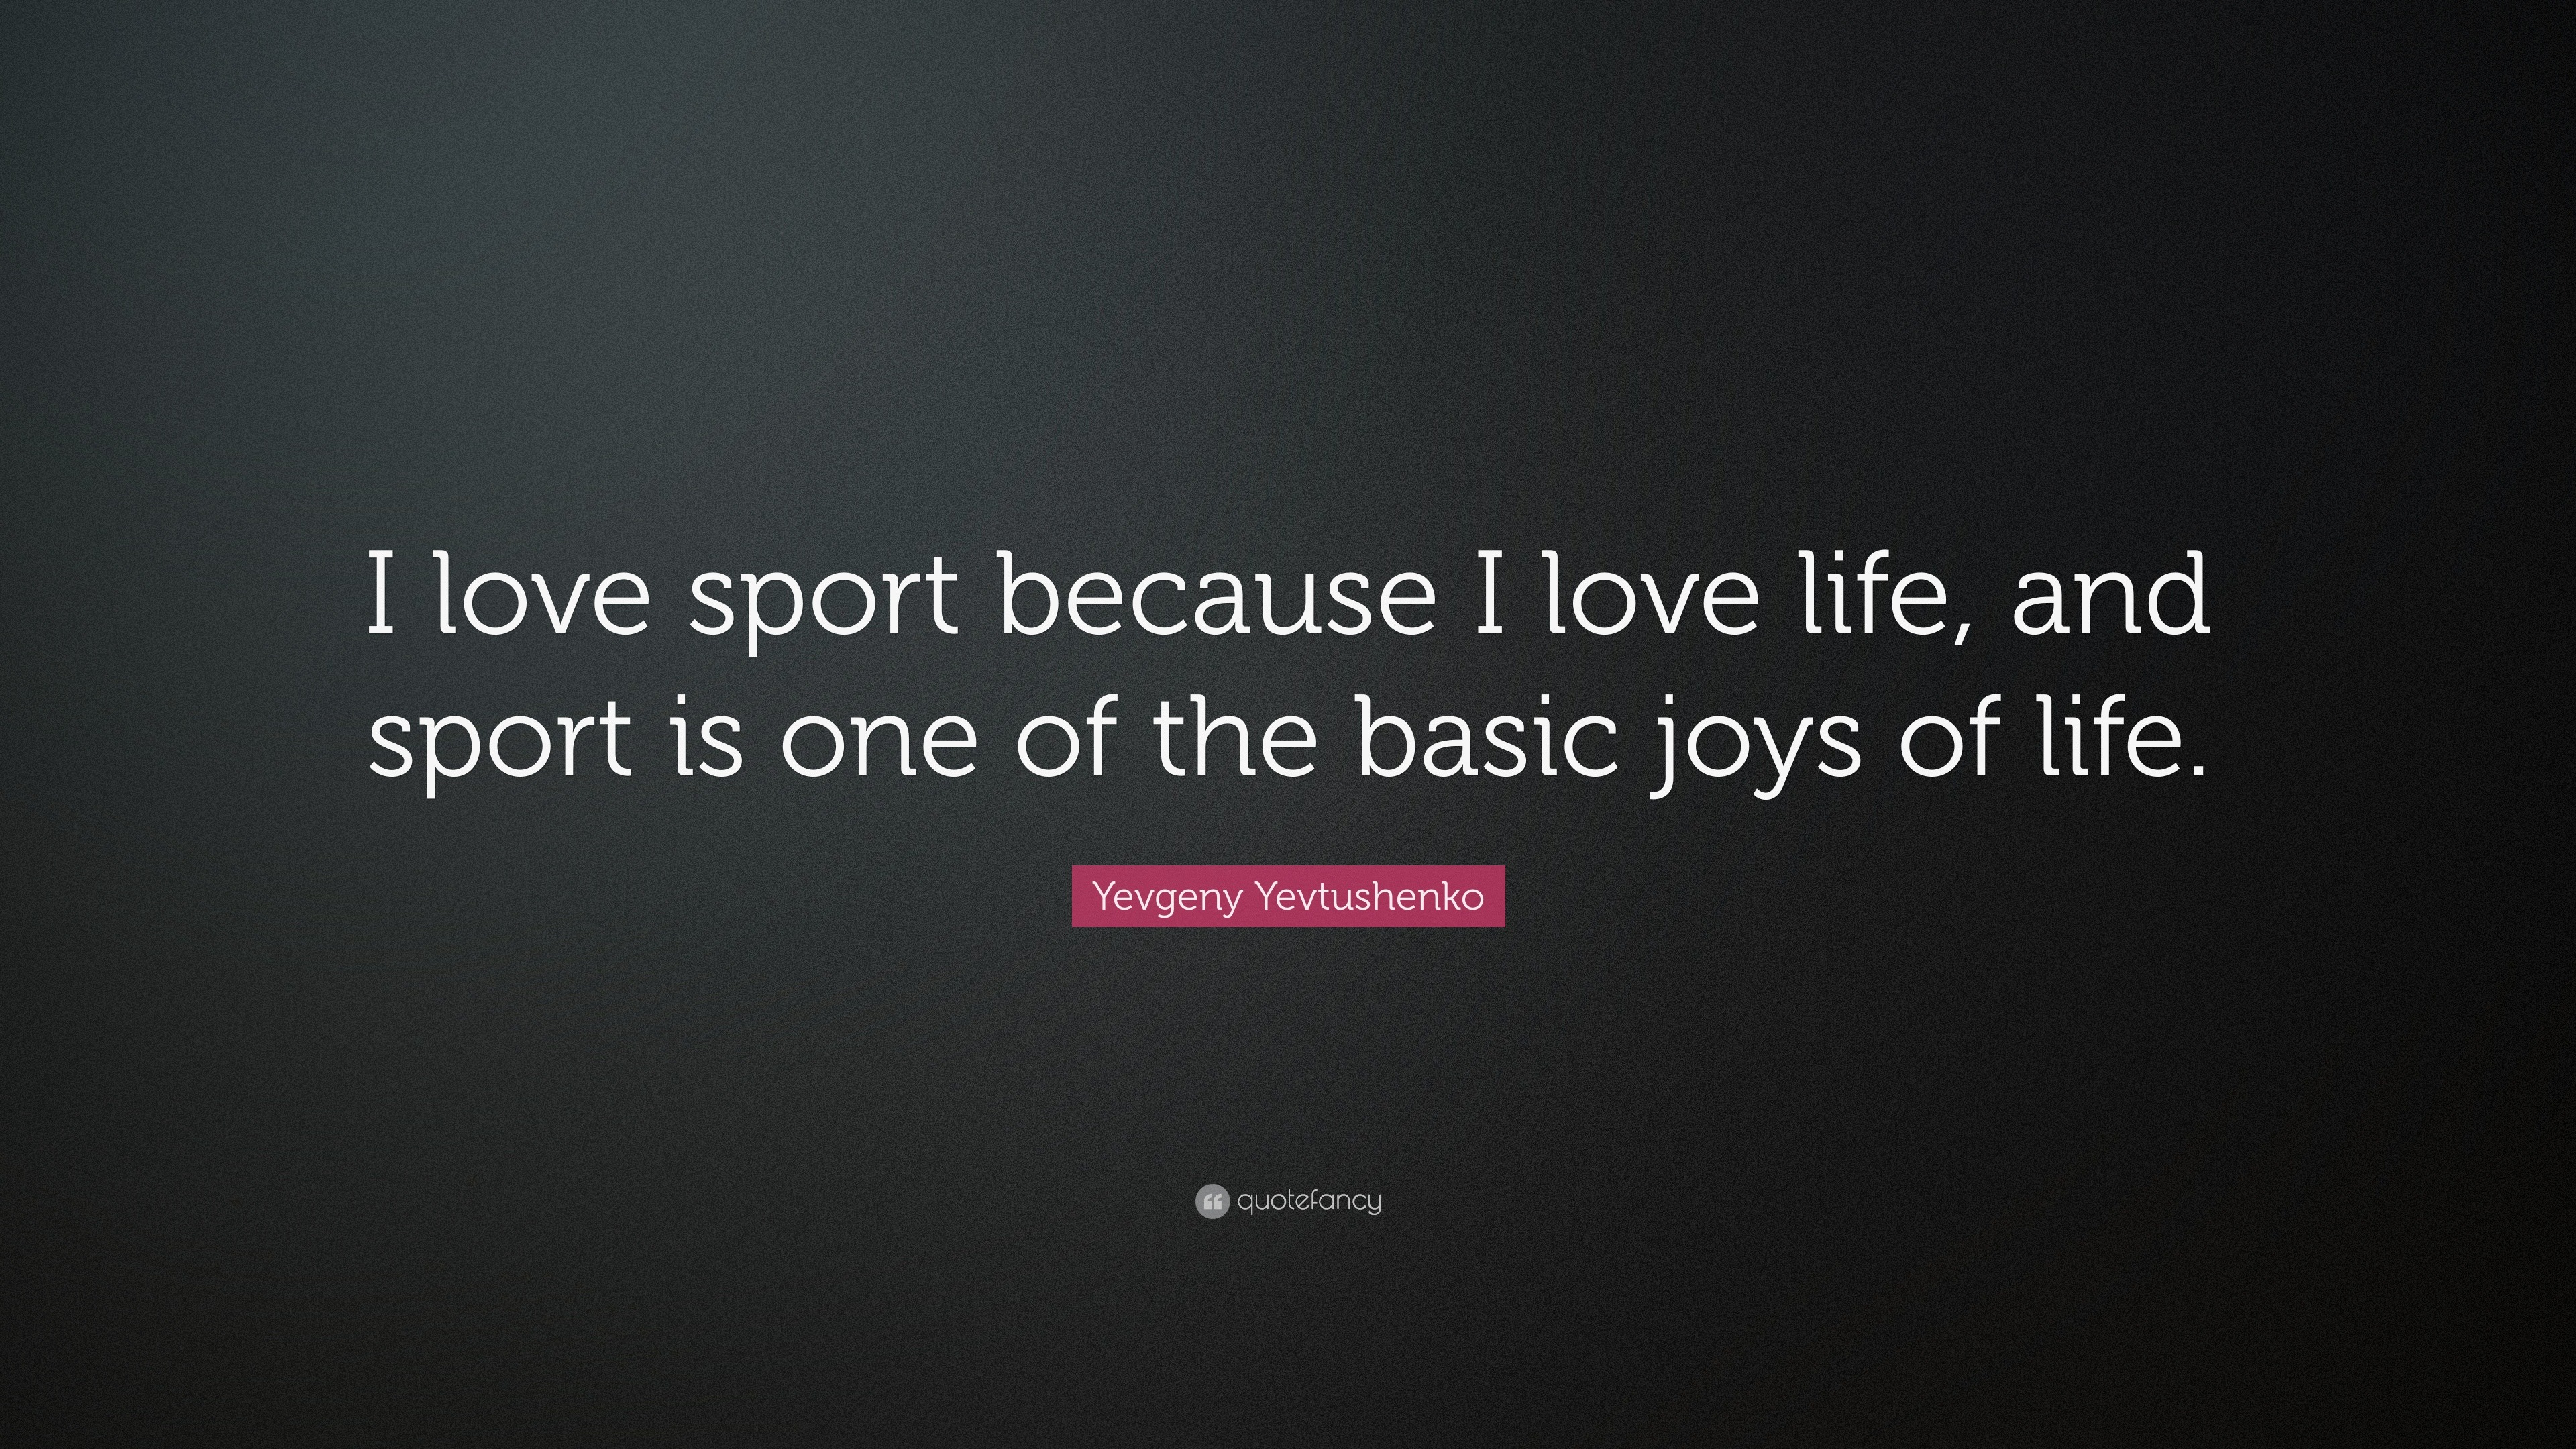 Yevgeny Yevtushenko Quote: “I love sport because I love life, and sport is  one of the